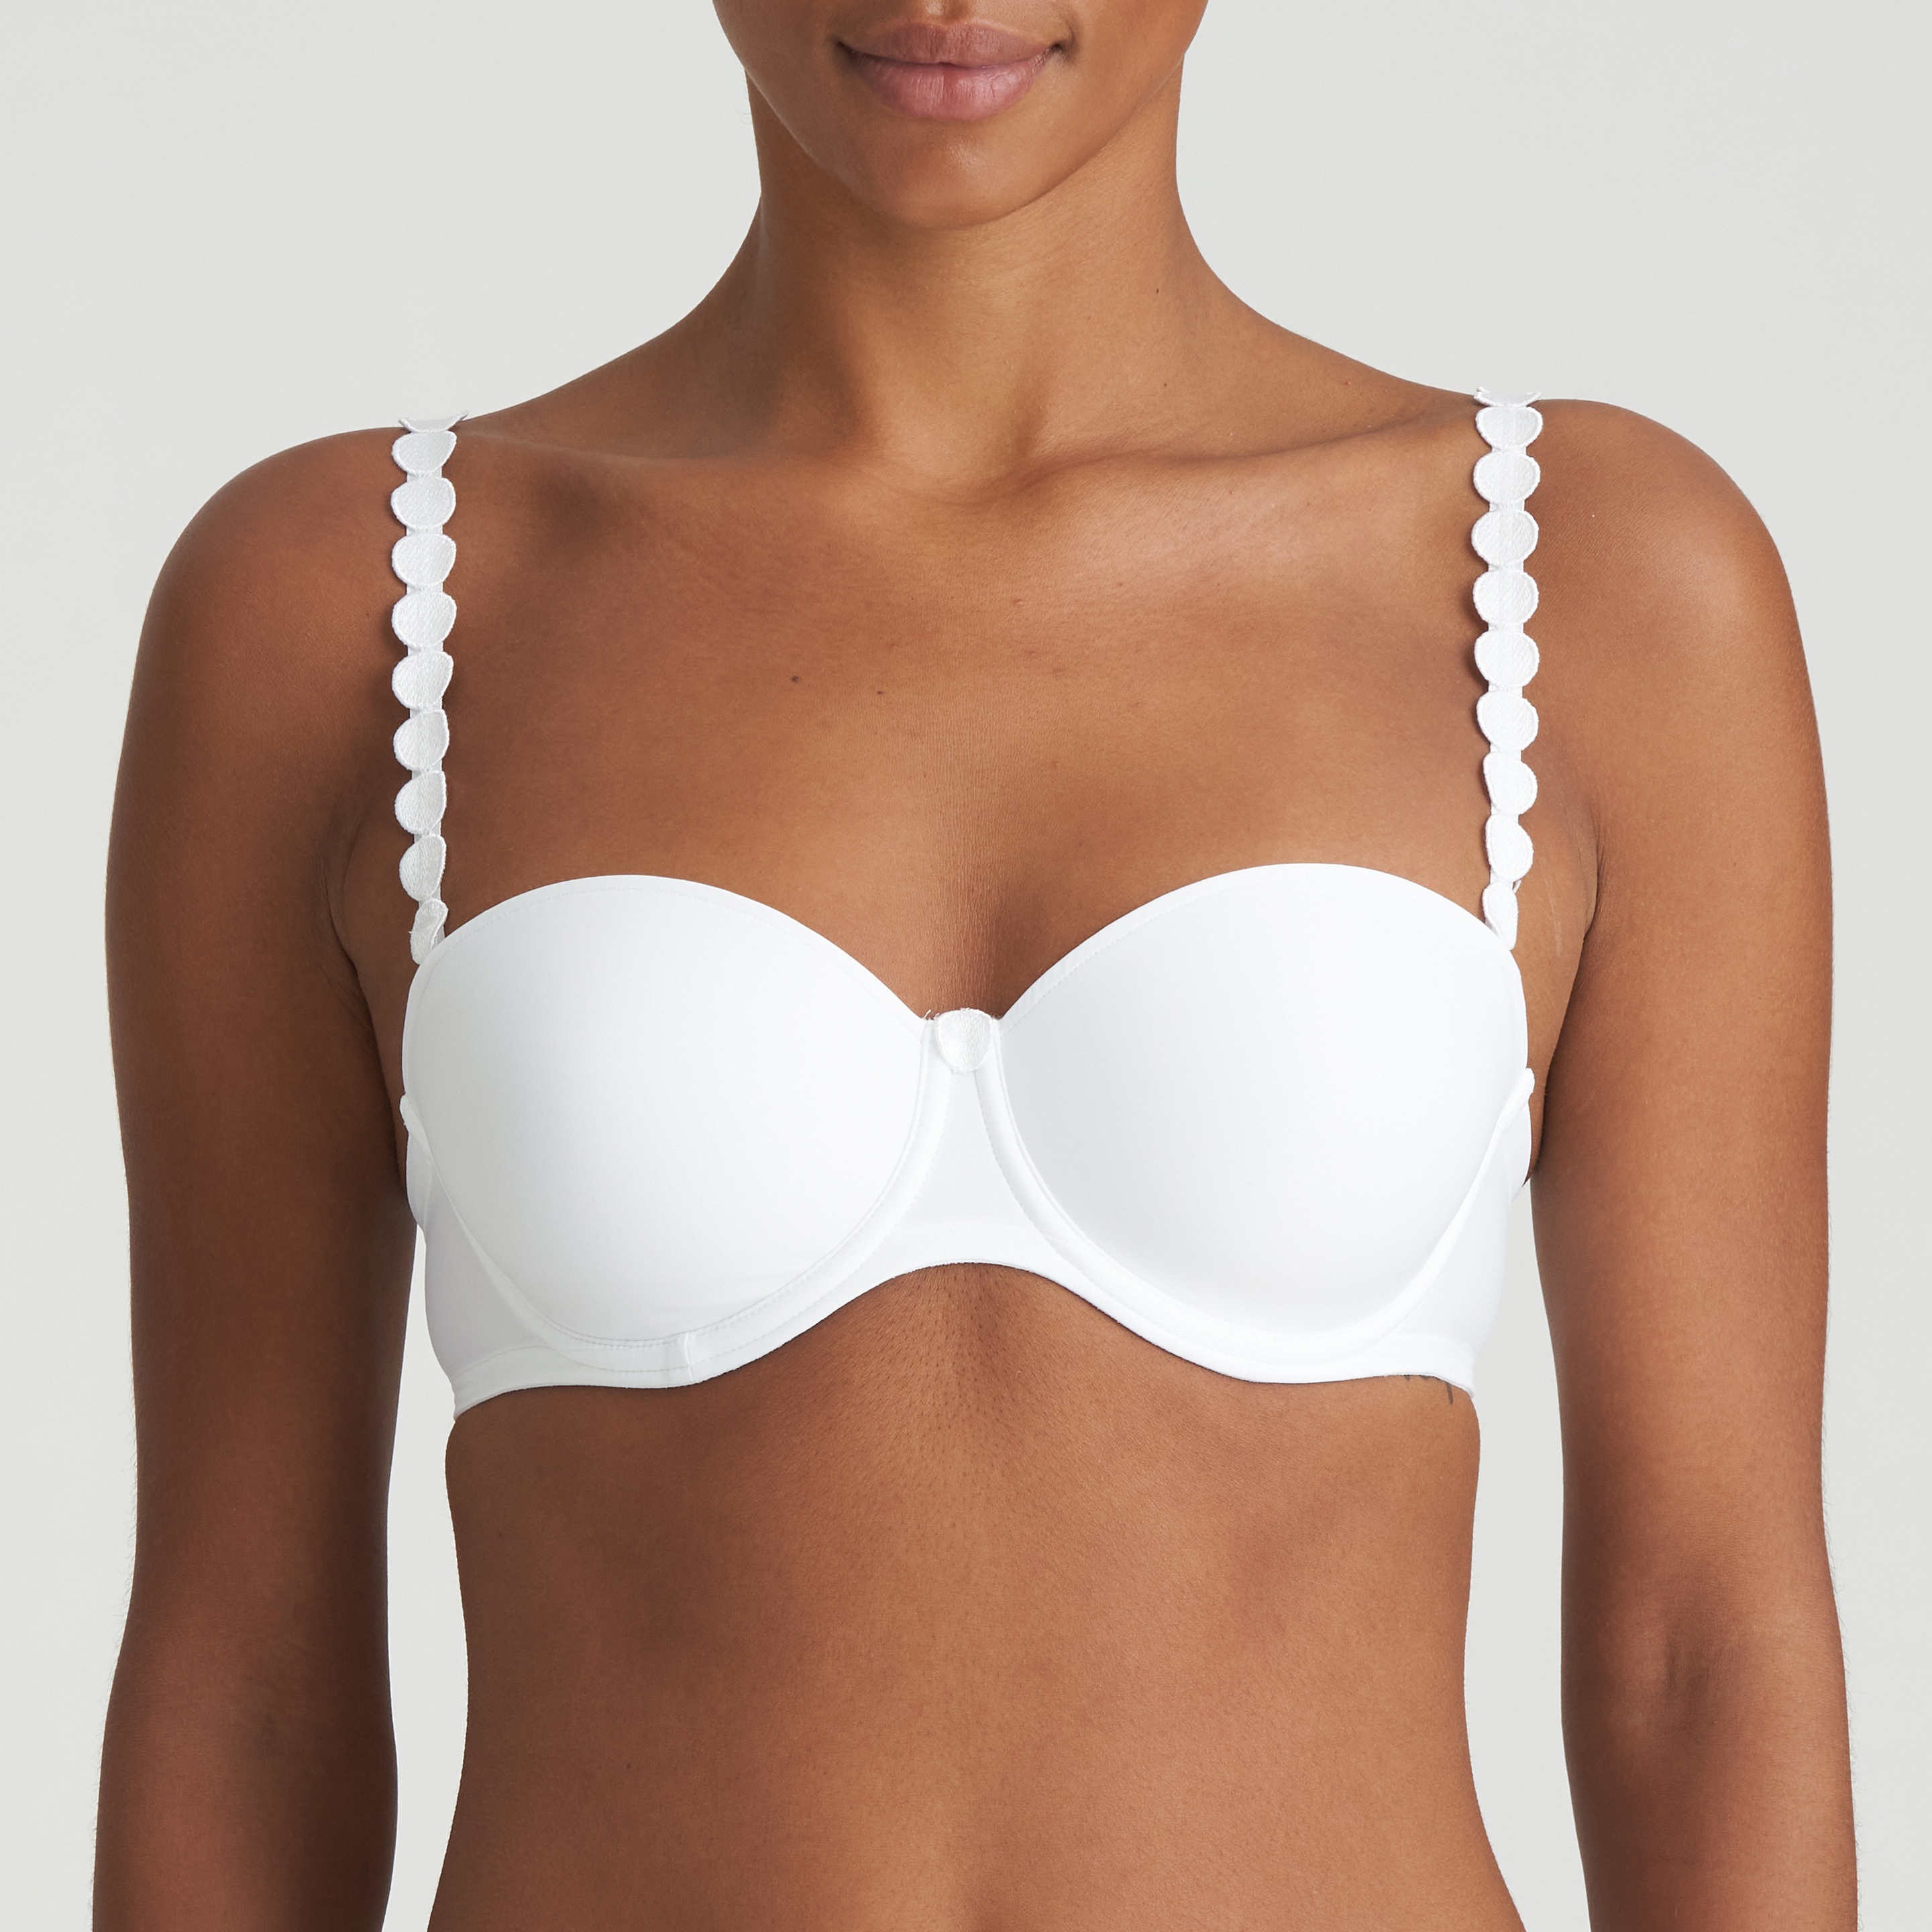 Strapless bras - clear strap push-up padded bras: Natural style1874-1893